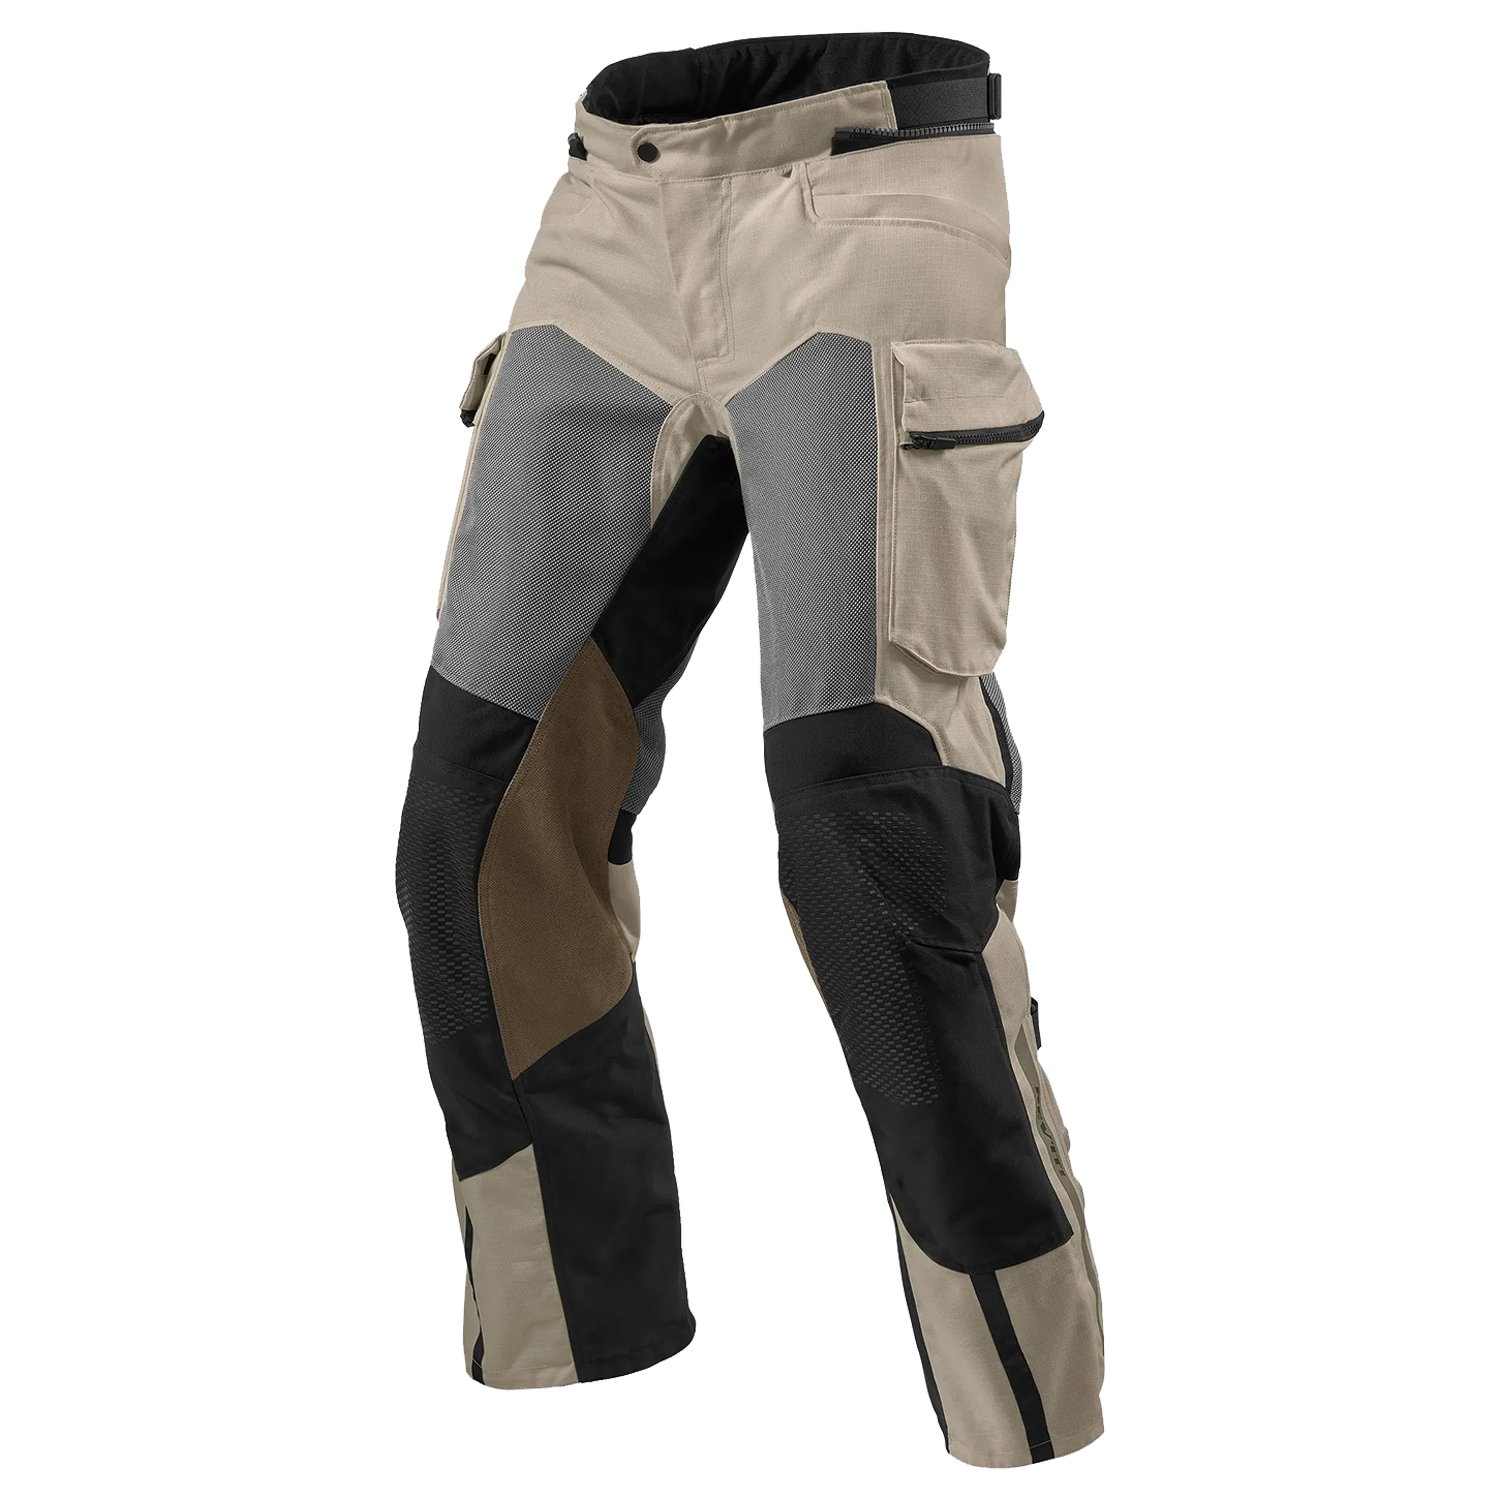 Image of REV'IT! Cayenne 2 Sand Motorcycle Pants Size M ID 8700001335638